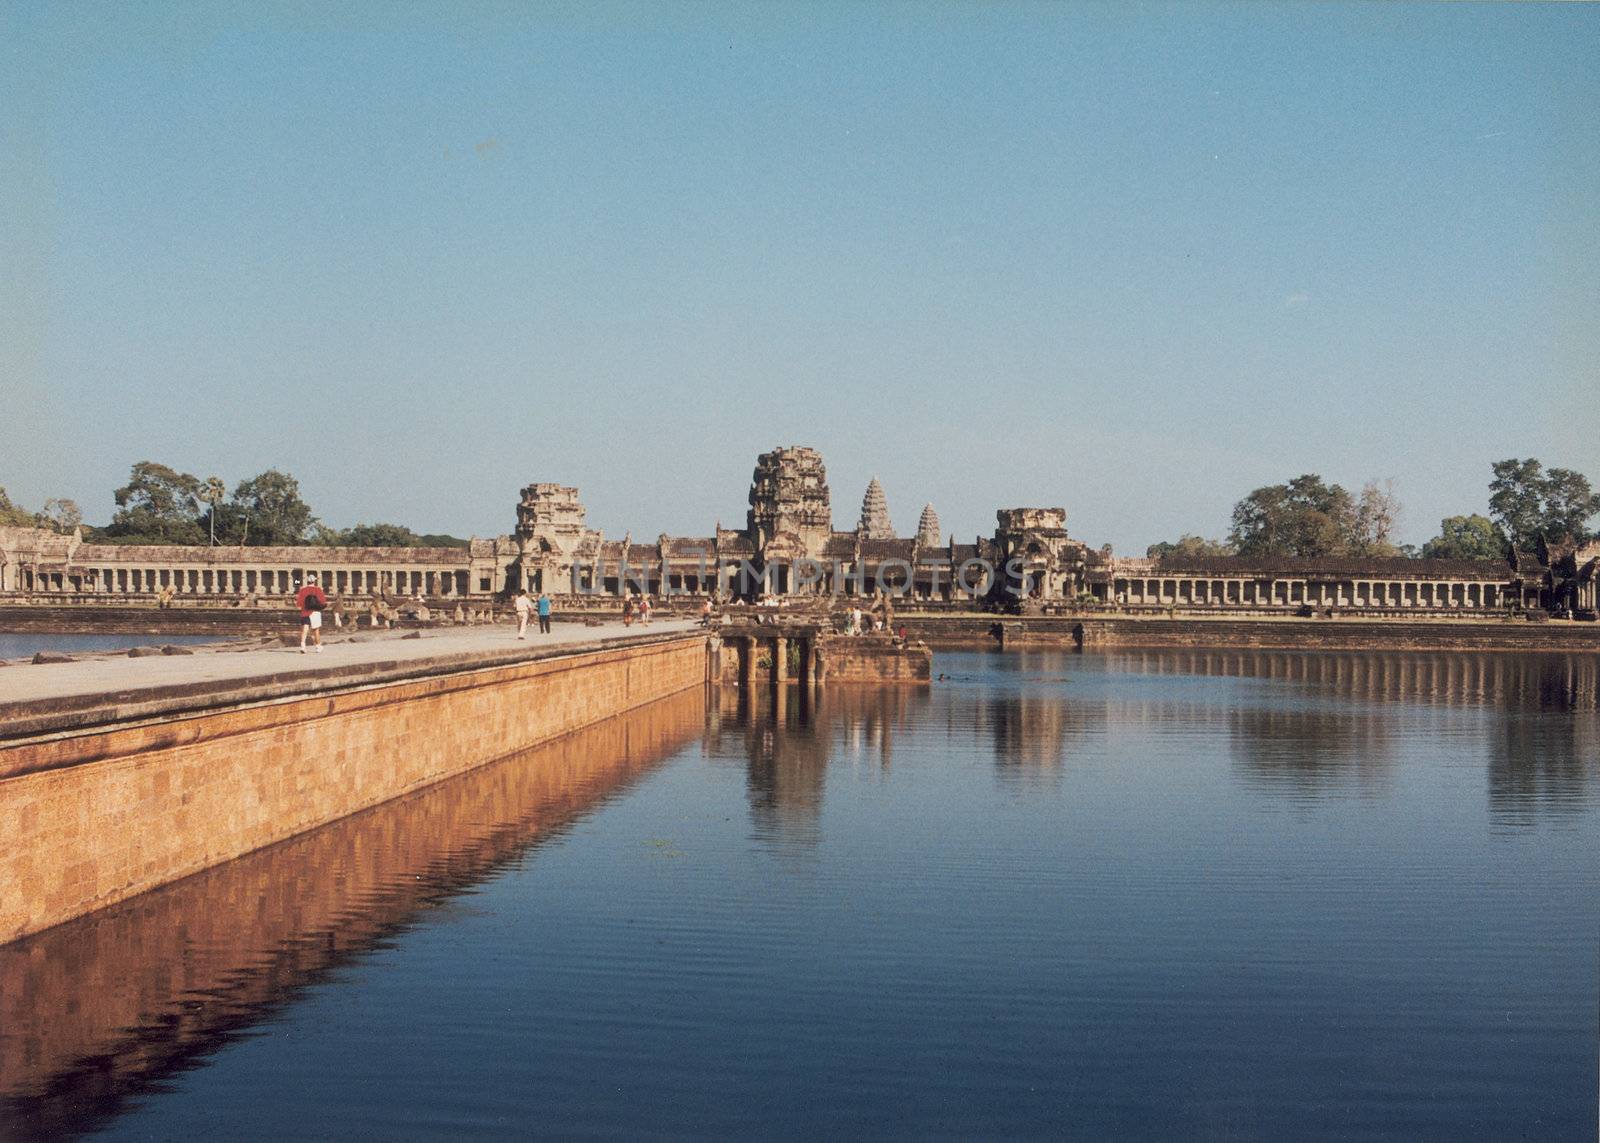 The front view of the main temple. This is the view before enter the main gate of the temple.